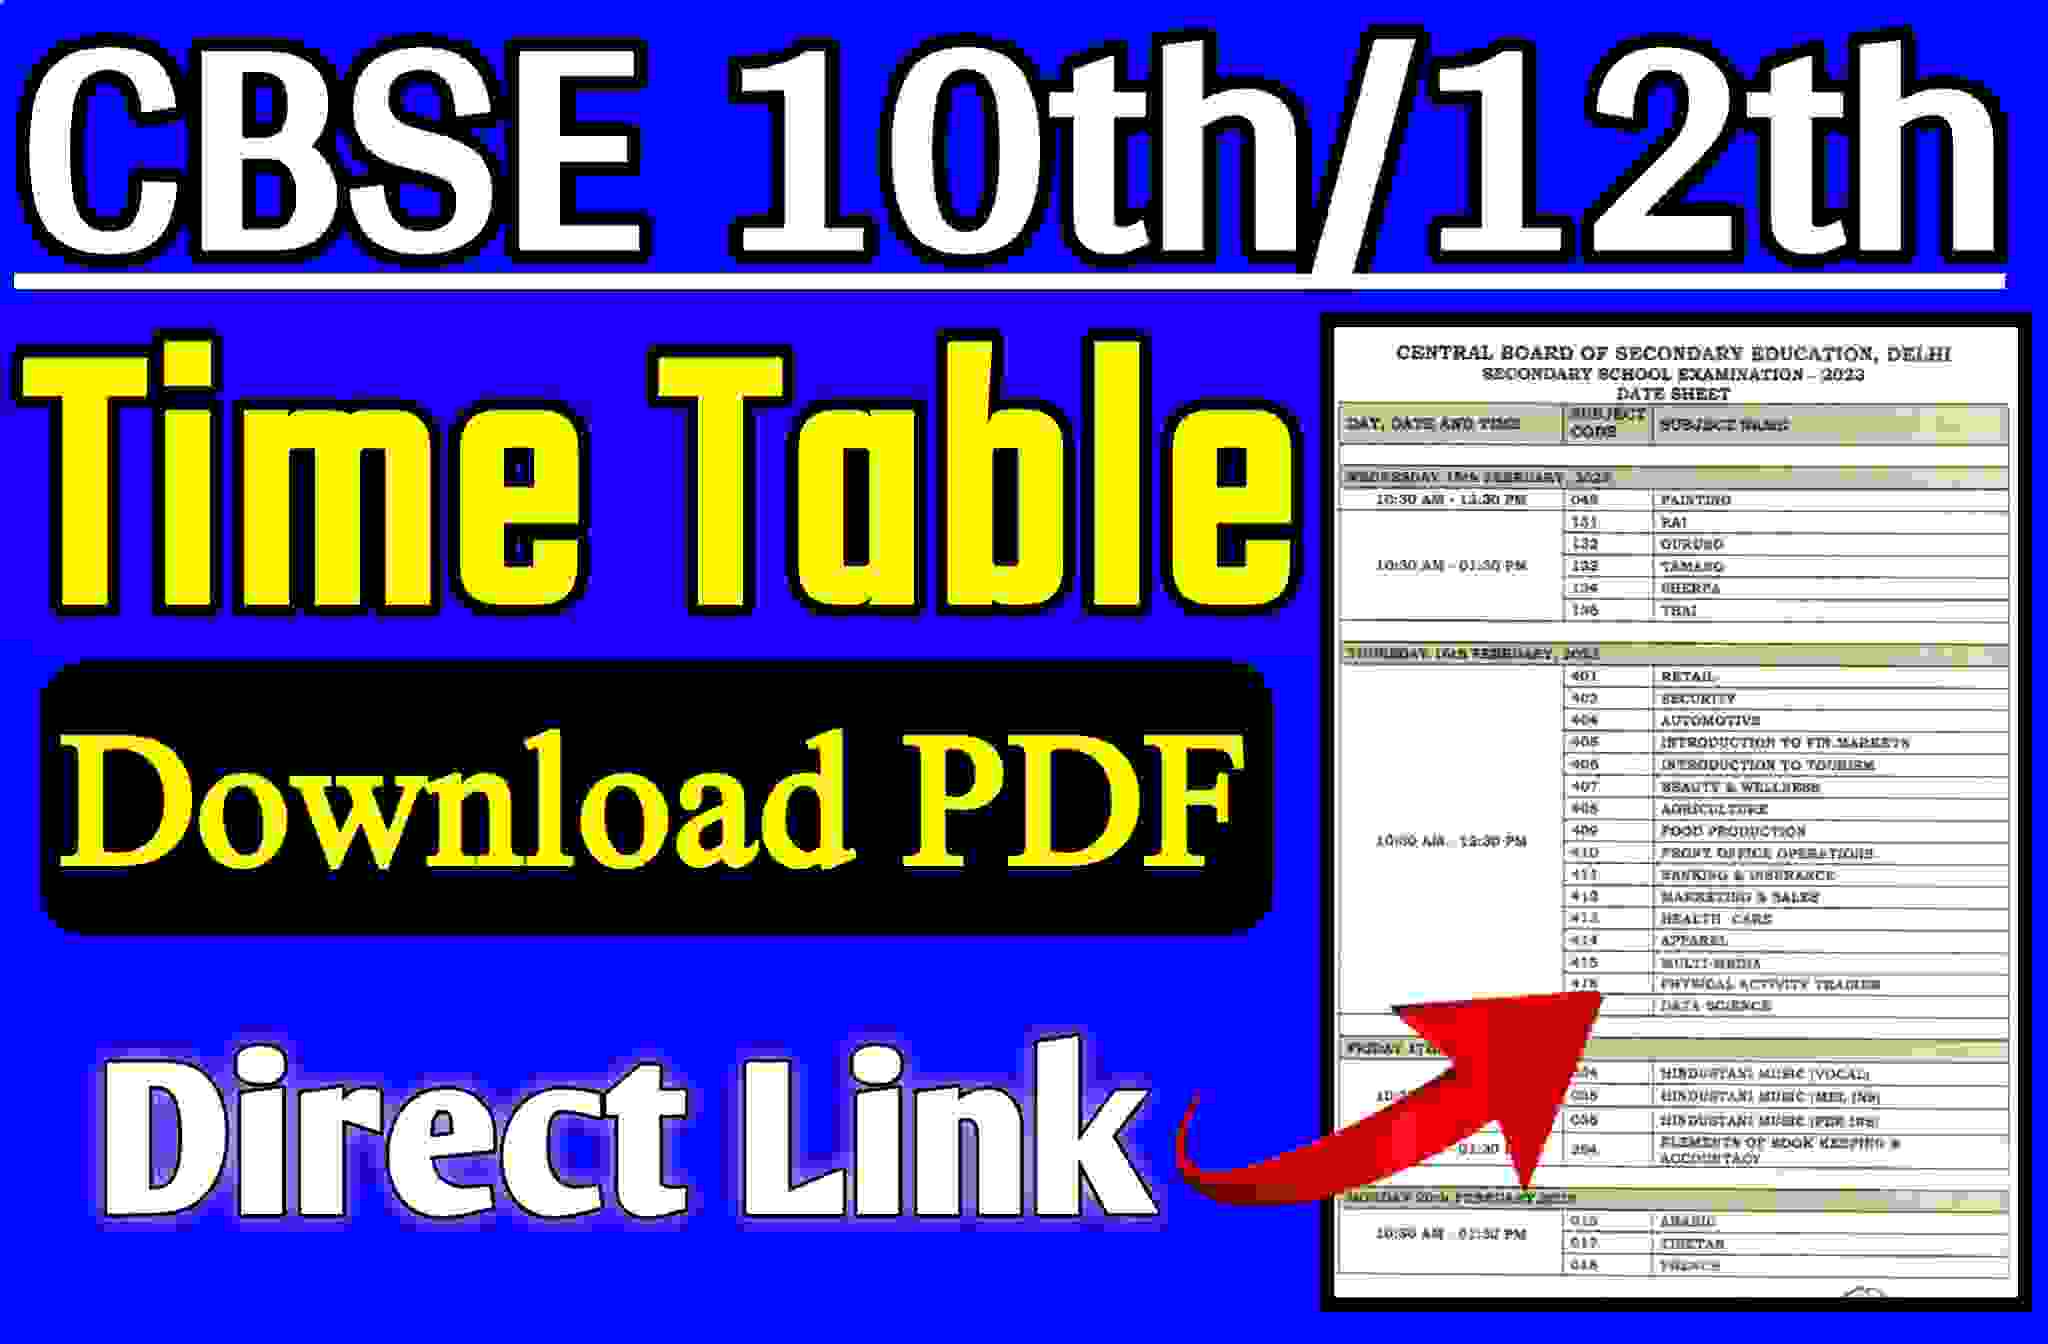 Download CBSE Time Table 10th and 12th